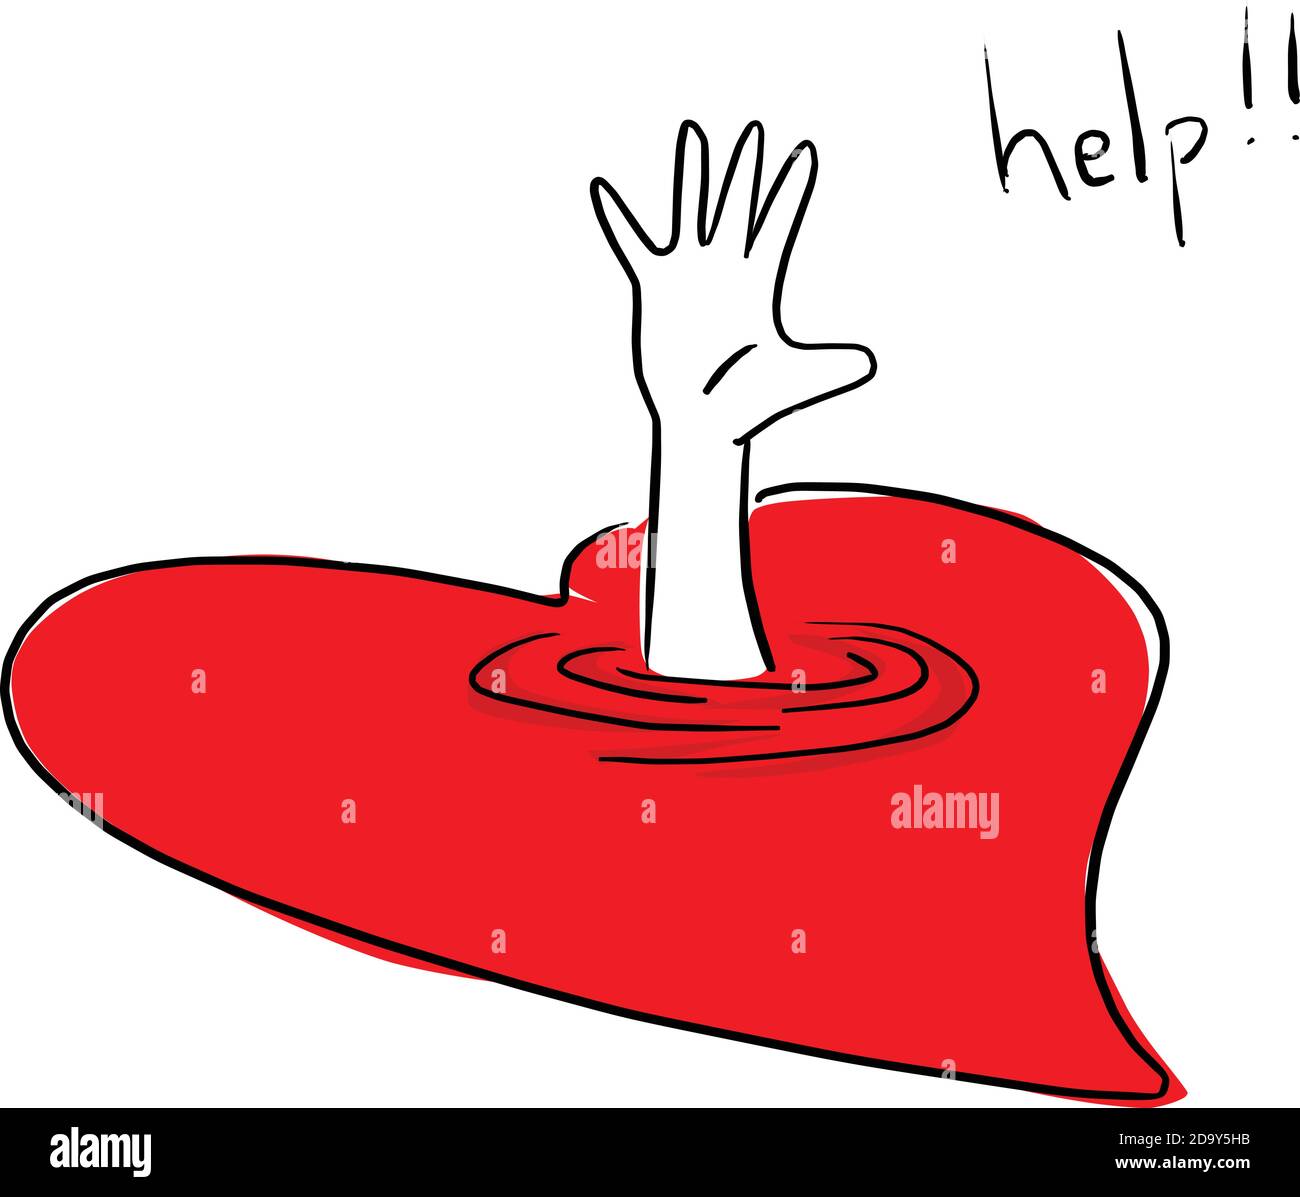 drowning victim in red heart vector illustration sketch doodle hand drawn with black lines isolated on white background. Stock Vector